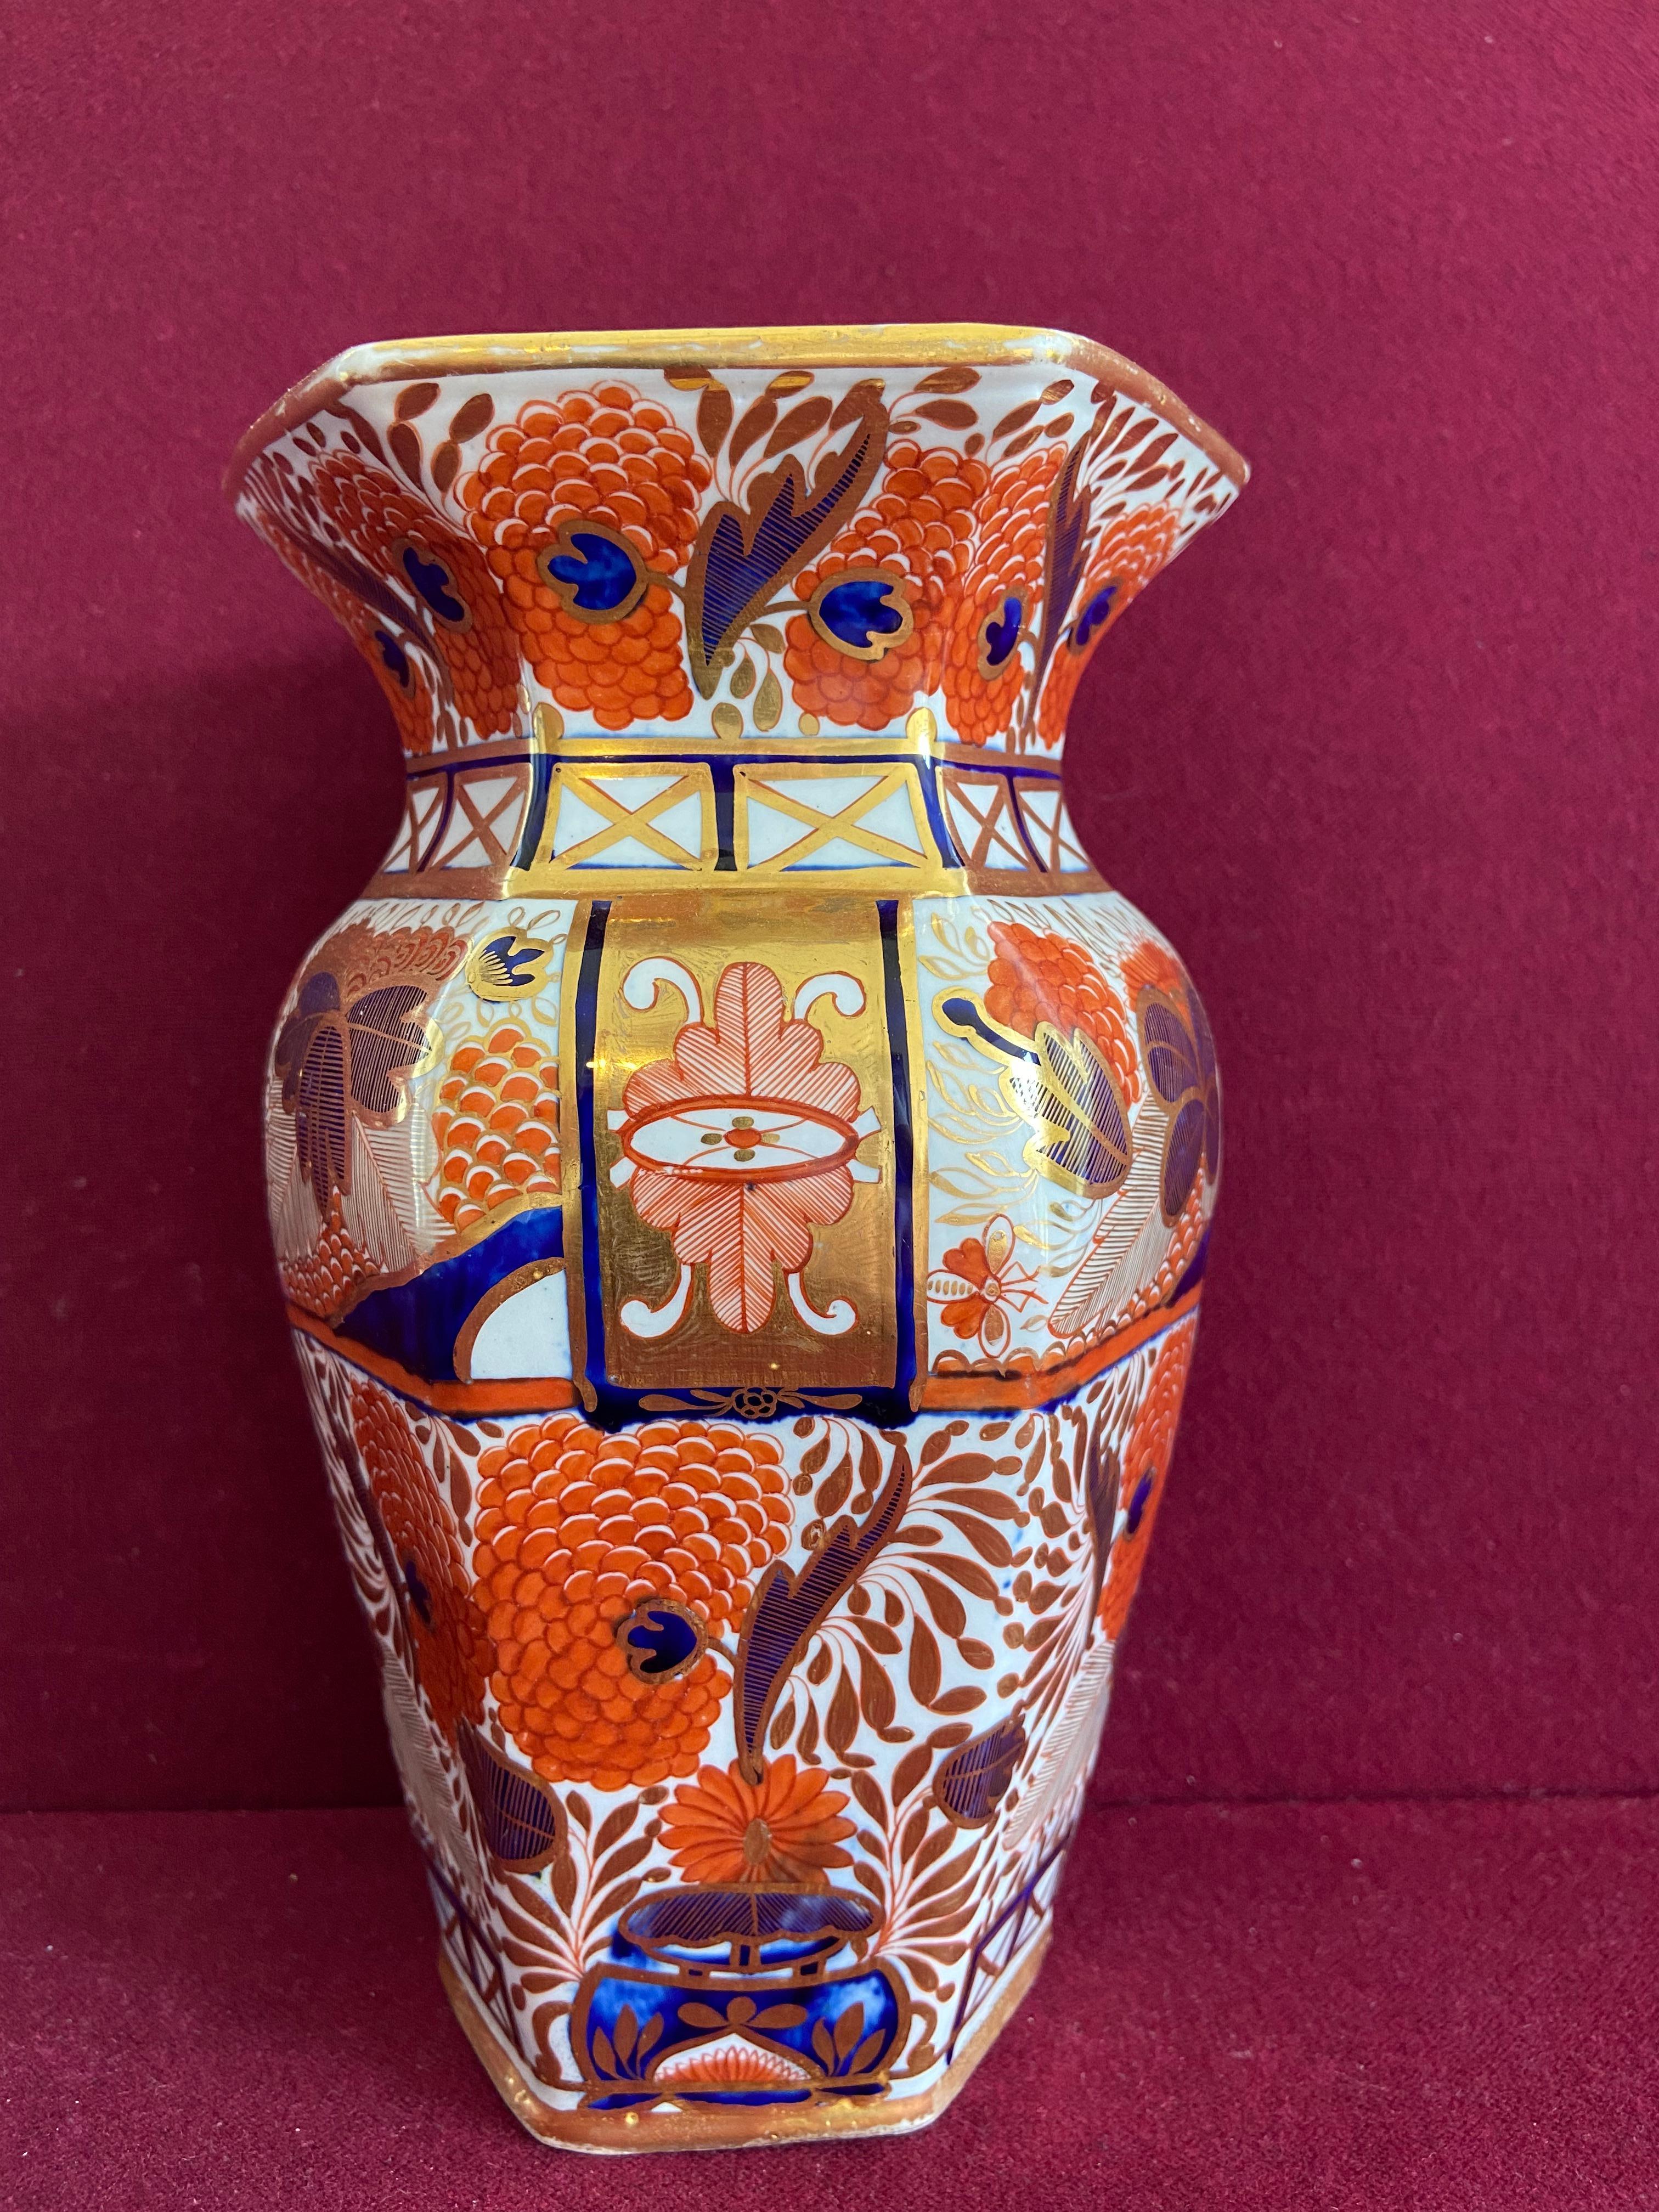 A Chamberlain Worcester Hexagonal vase c.1805-1810. Richly decorated in the popular ''Japan'' pattern number 240. The decoration is a beautiful example of the Regency ''Japan